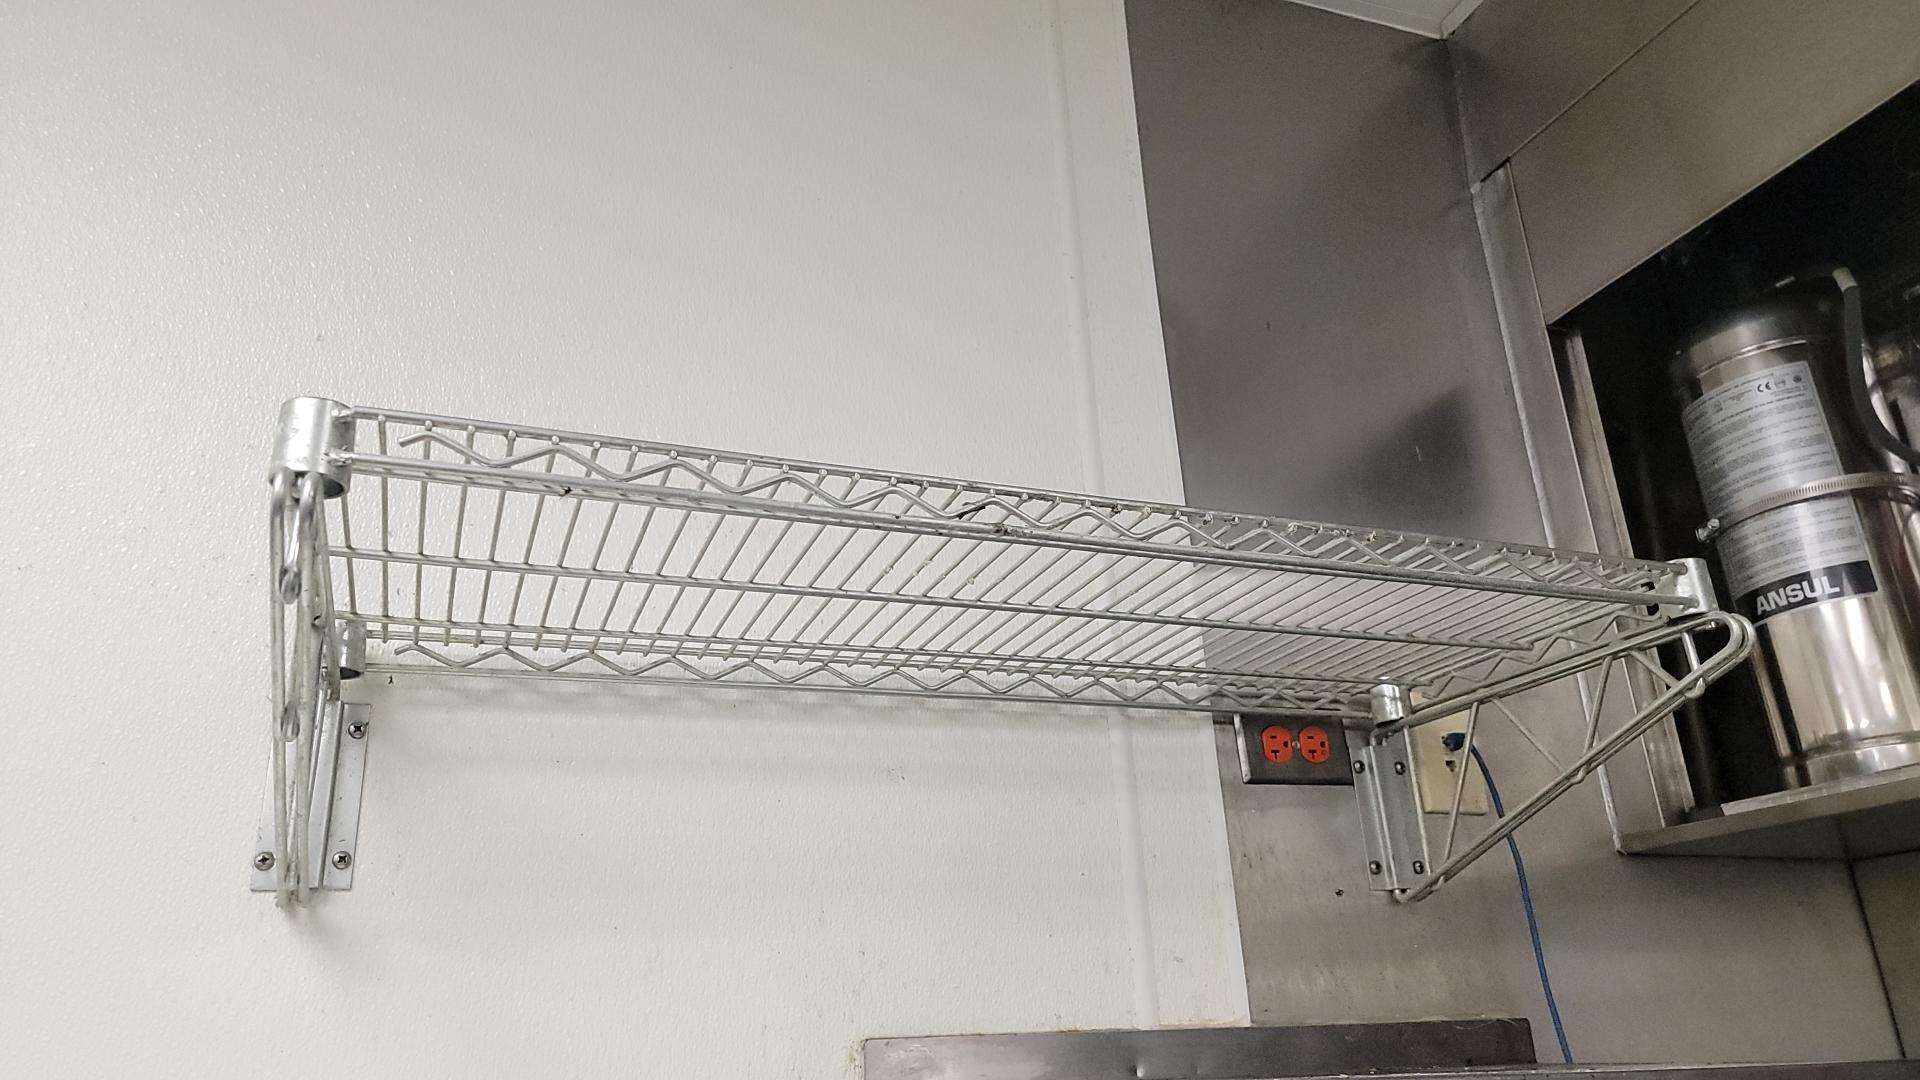 Wall mounted wire shelves 3' x 14" with brackets